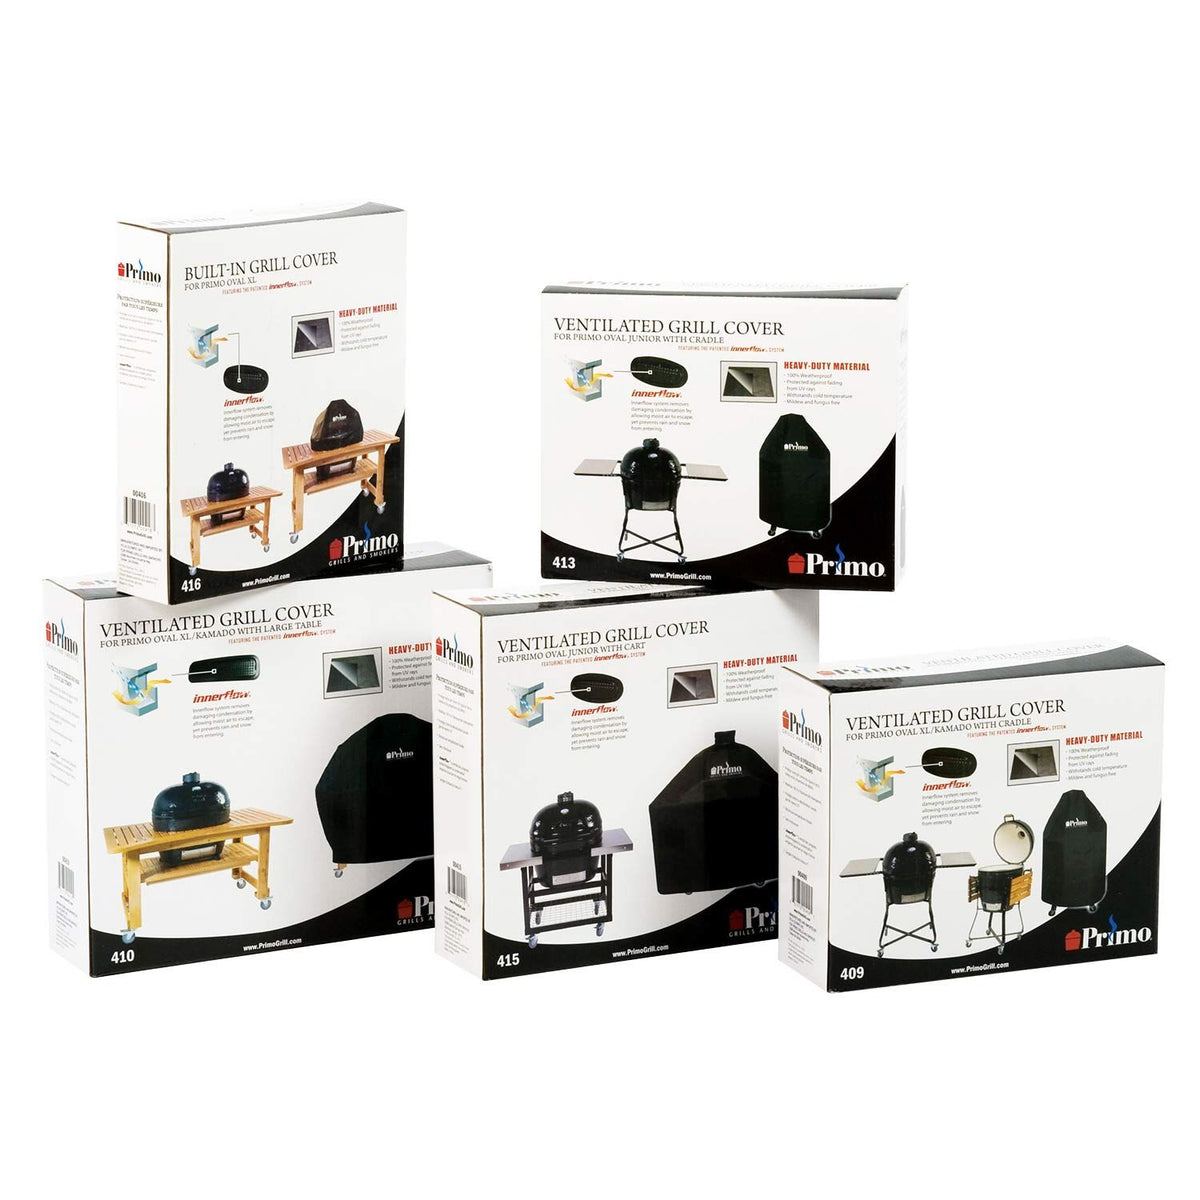 Primo LG 300 or JR 200 with Countertop Table Grill Cover with Box